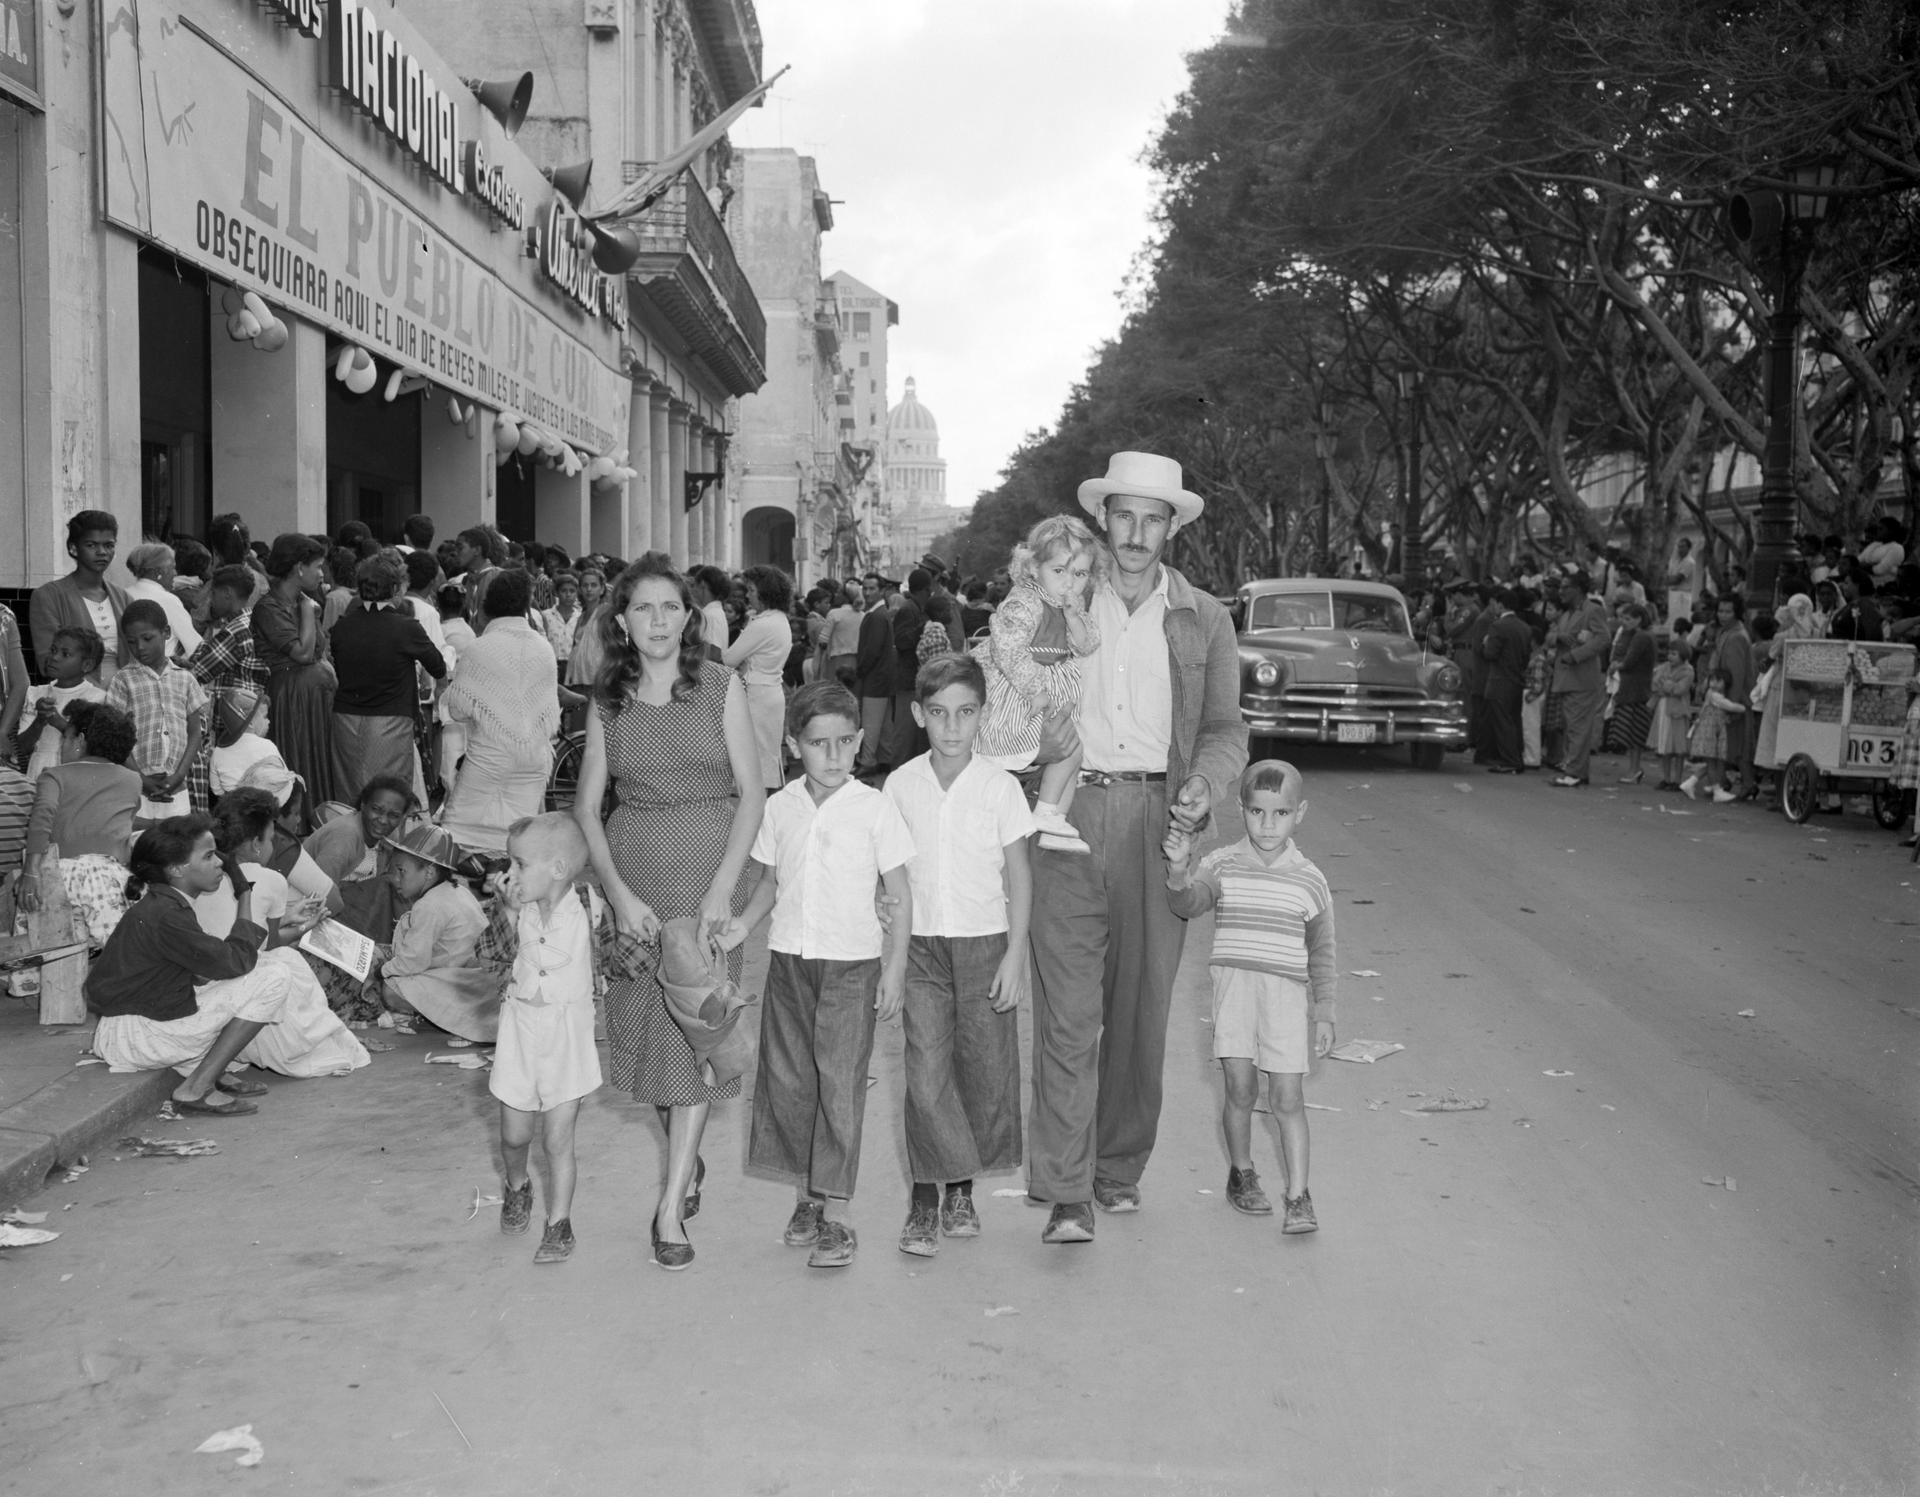 January 11, 1959 - Havana, Cuba - These five little brothers, accompanied by their parents, leave a local broadcast station, and walk down The Prado empty-handed. They had come seeking toys that were being given away on January 11, declared a holiday.